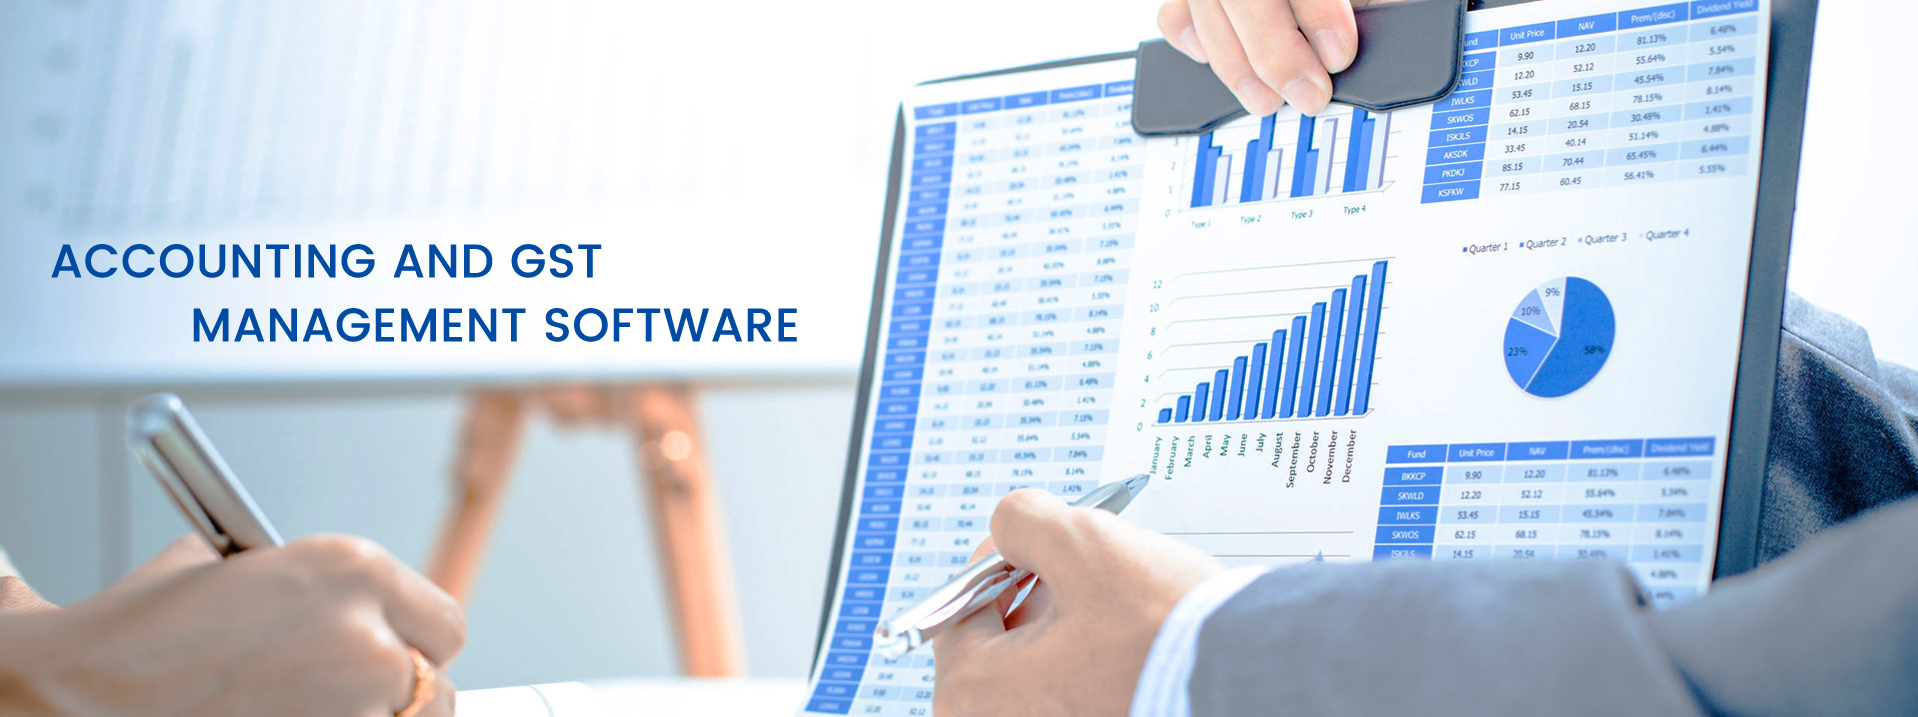 accounting software banner